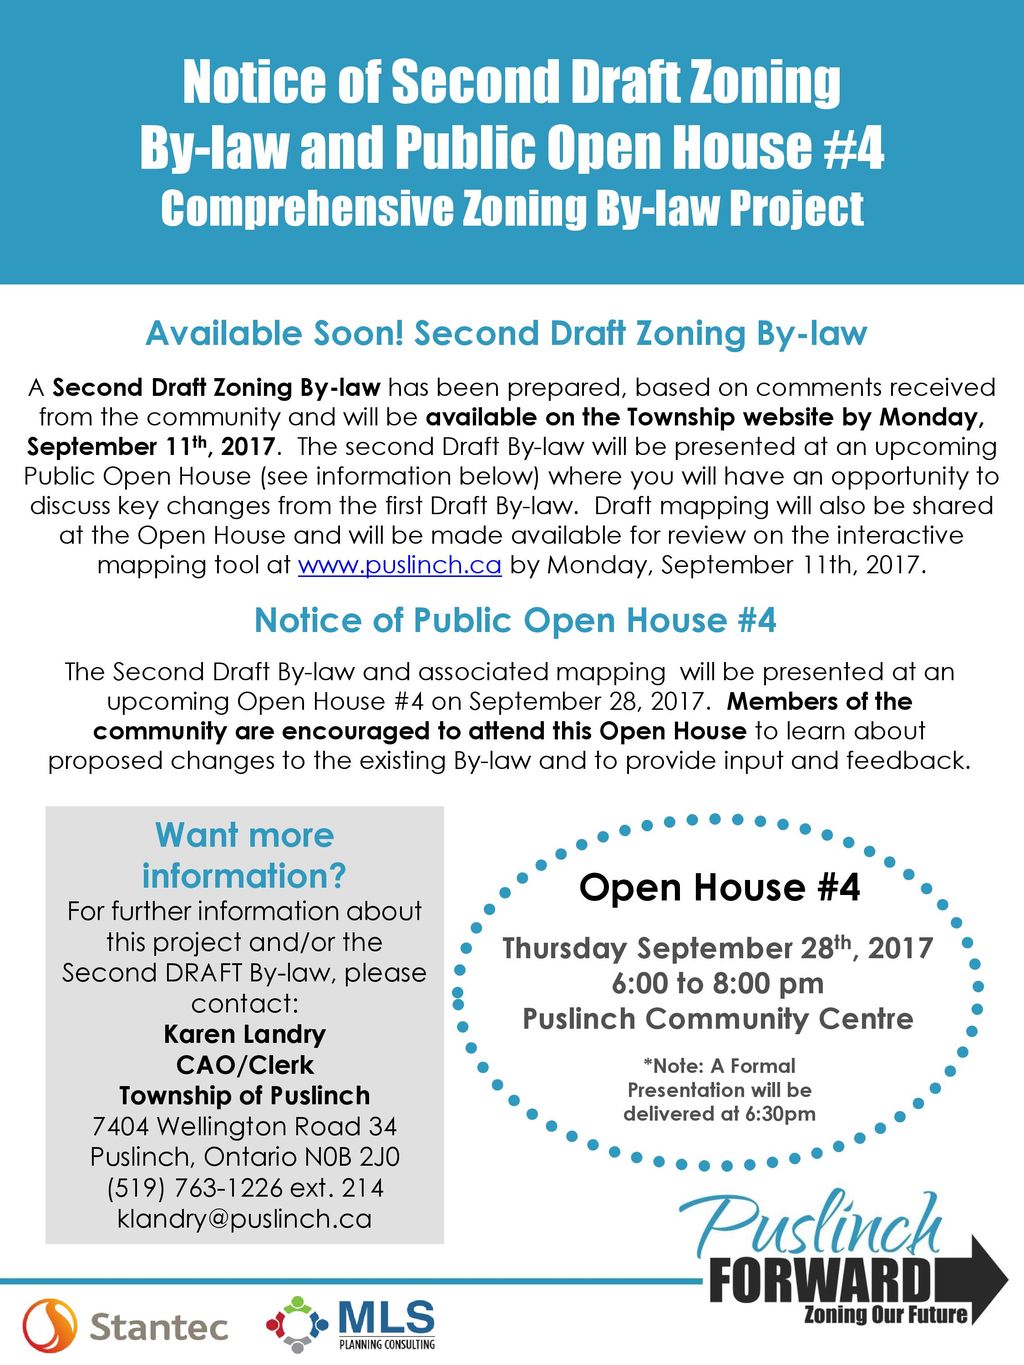 Notice of Second Draft Zoning By-law and Public Open House #4 Comprehensive Zoning By-law Project